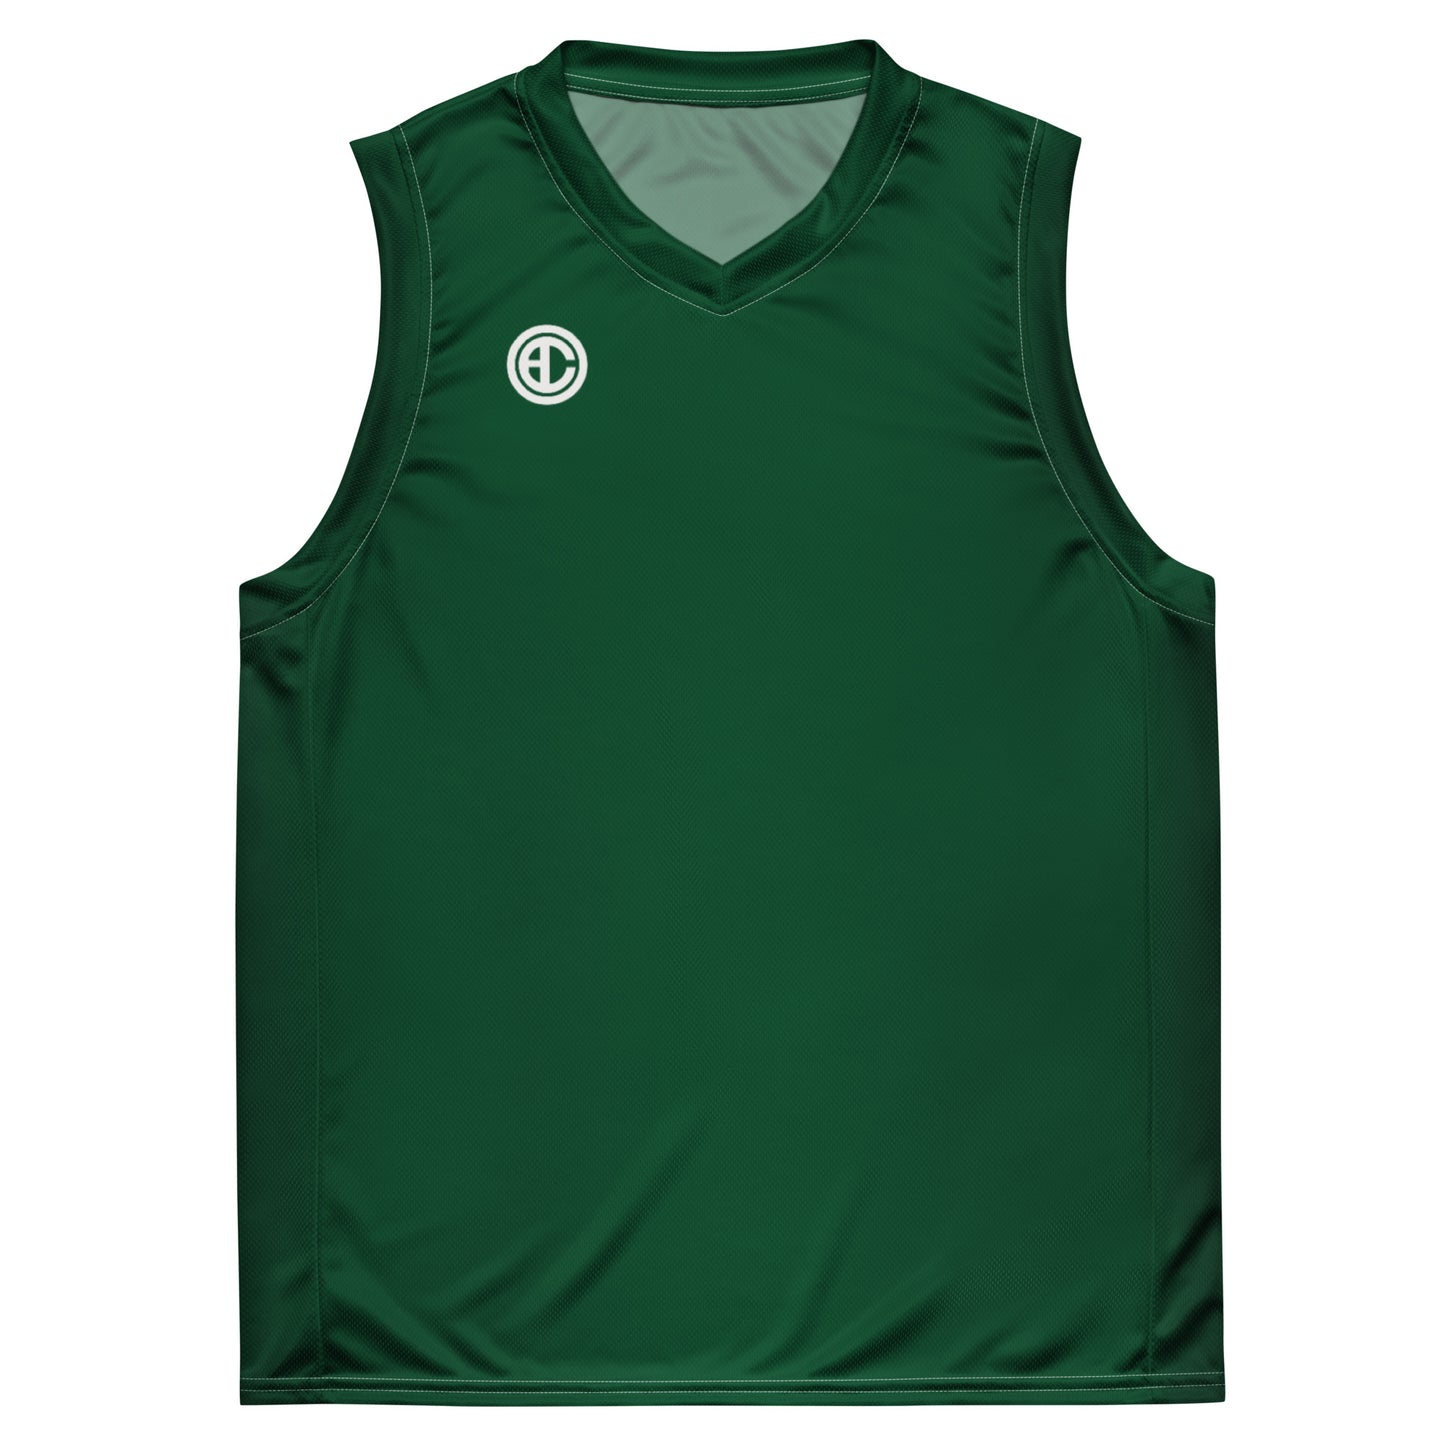 #3 GOD DID green and white basketball Jersey